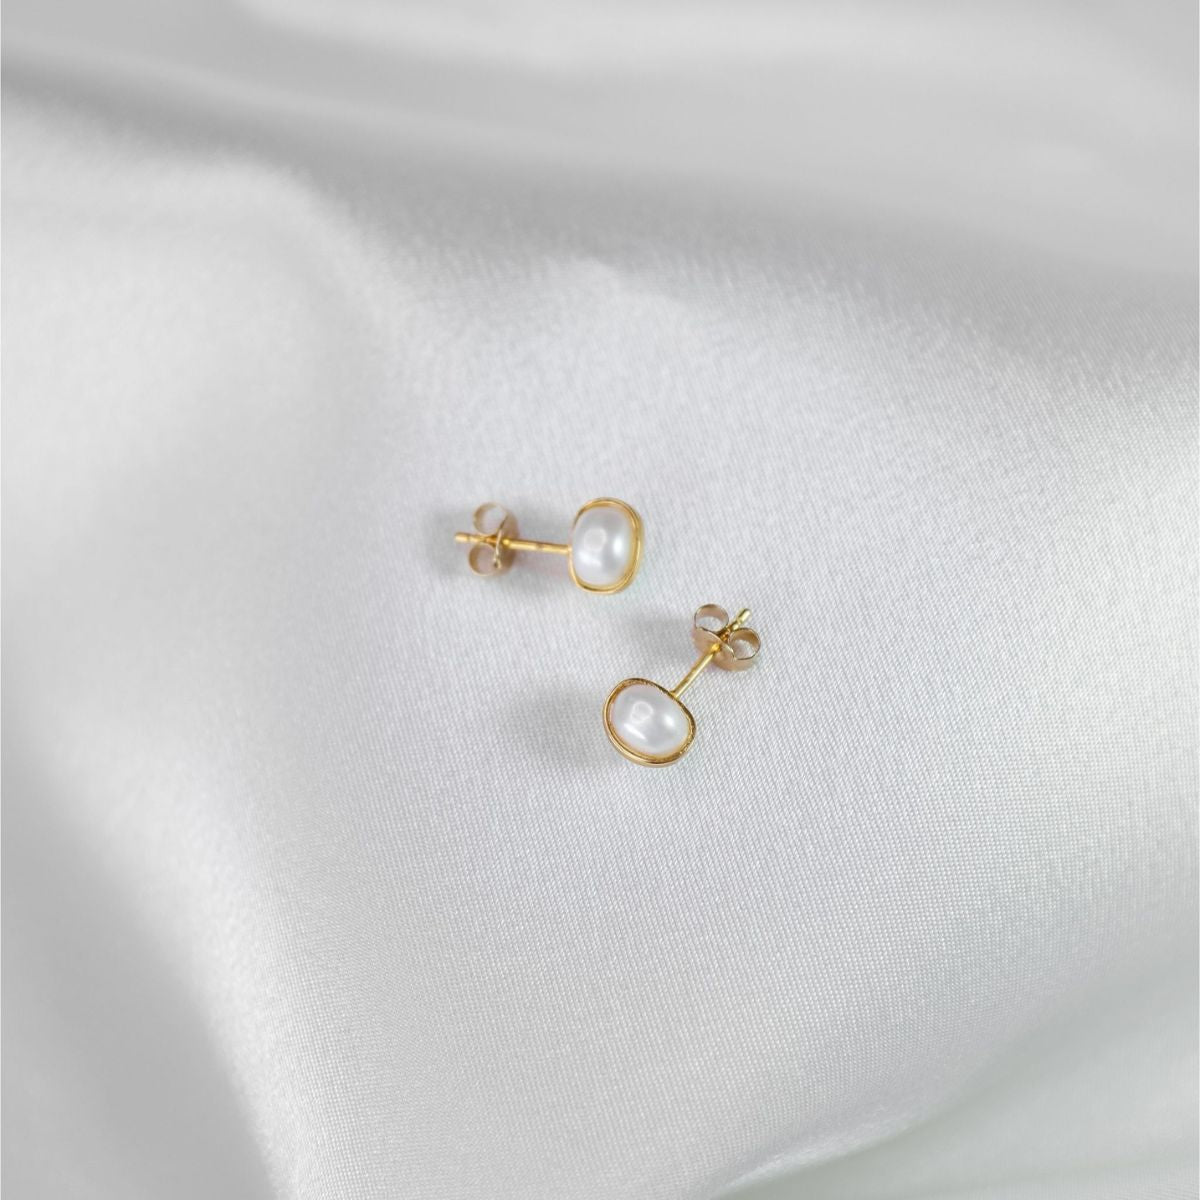 a pair of pearl earrings on a white cloth